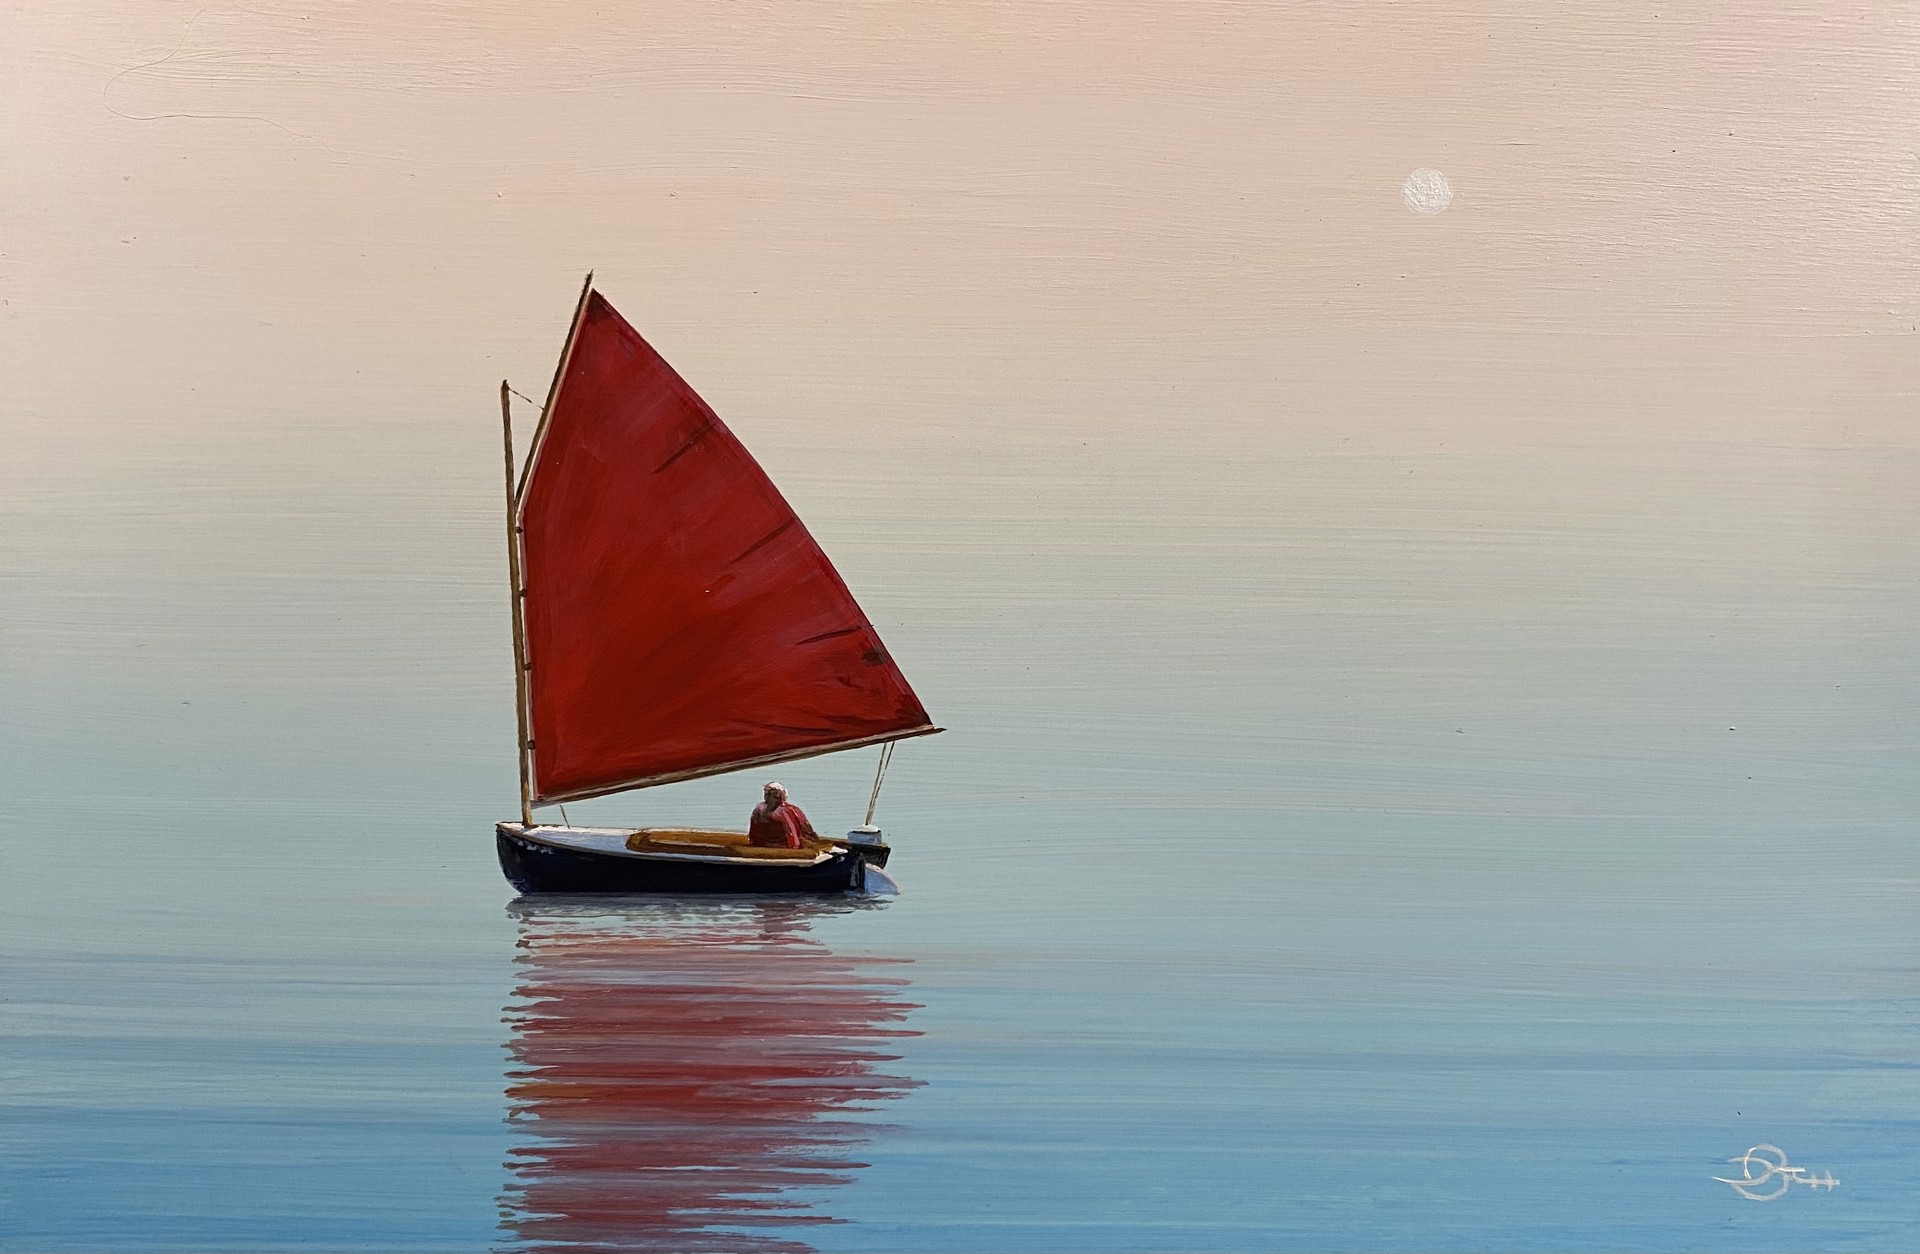 Morning Sail by Del-Bourree Bach